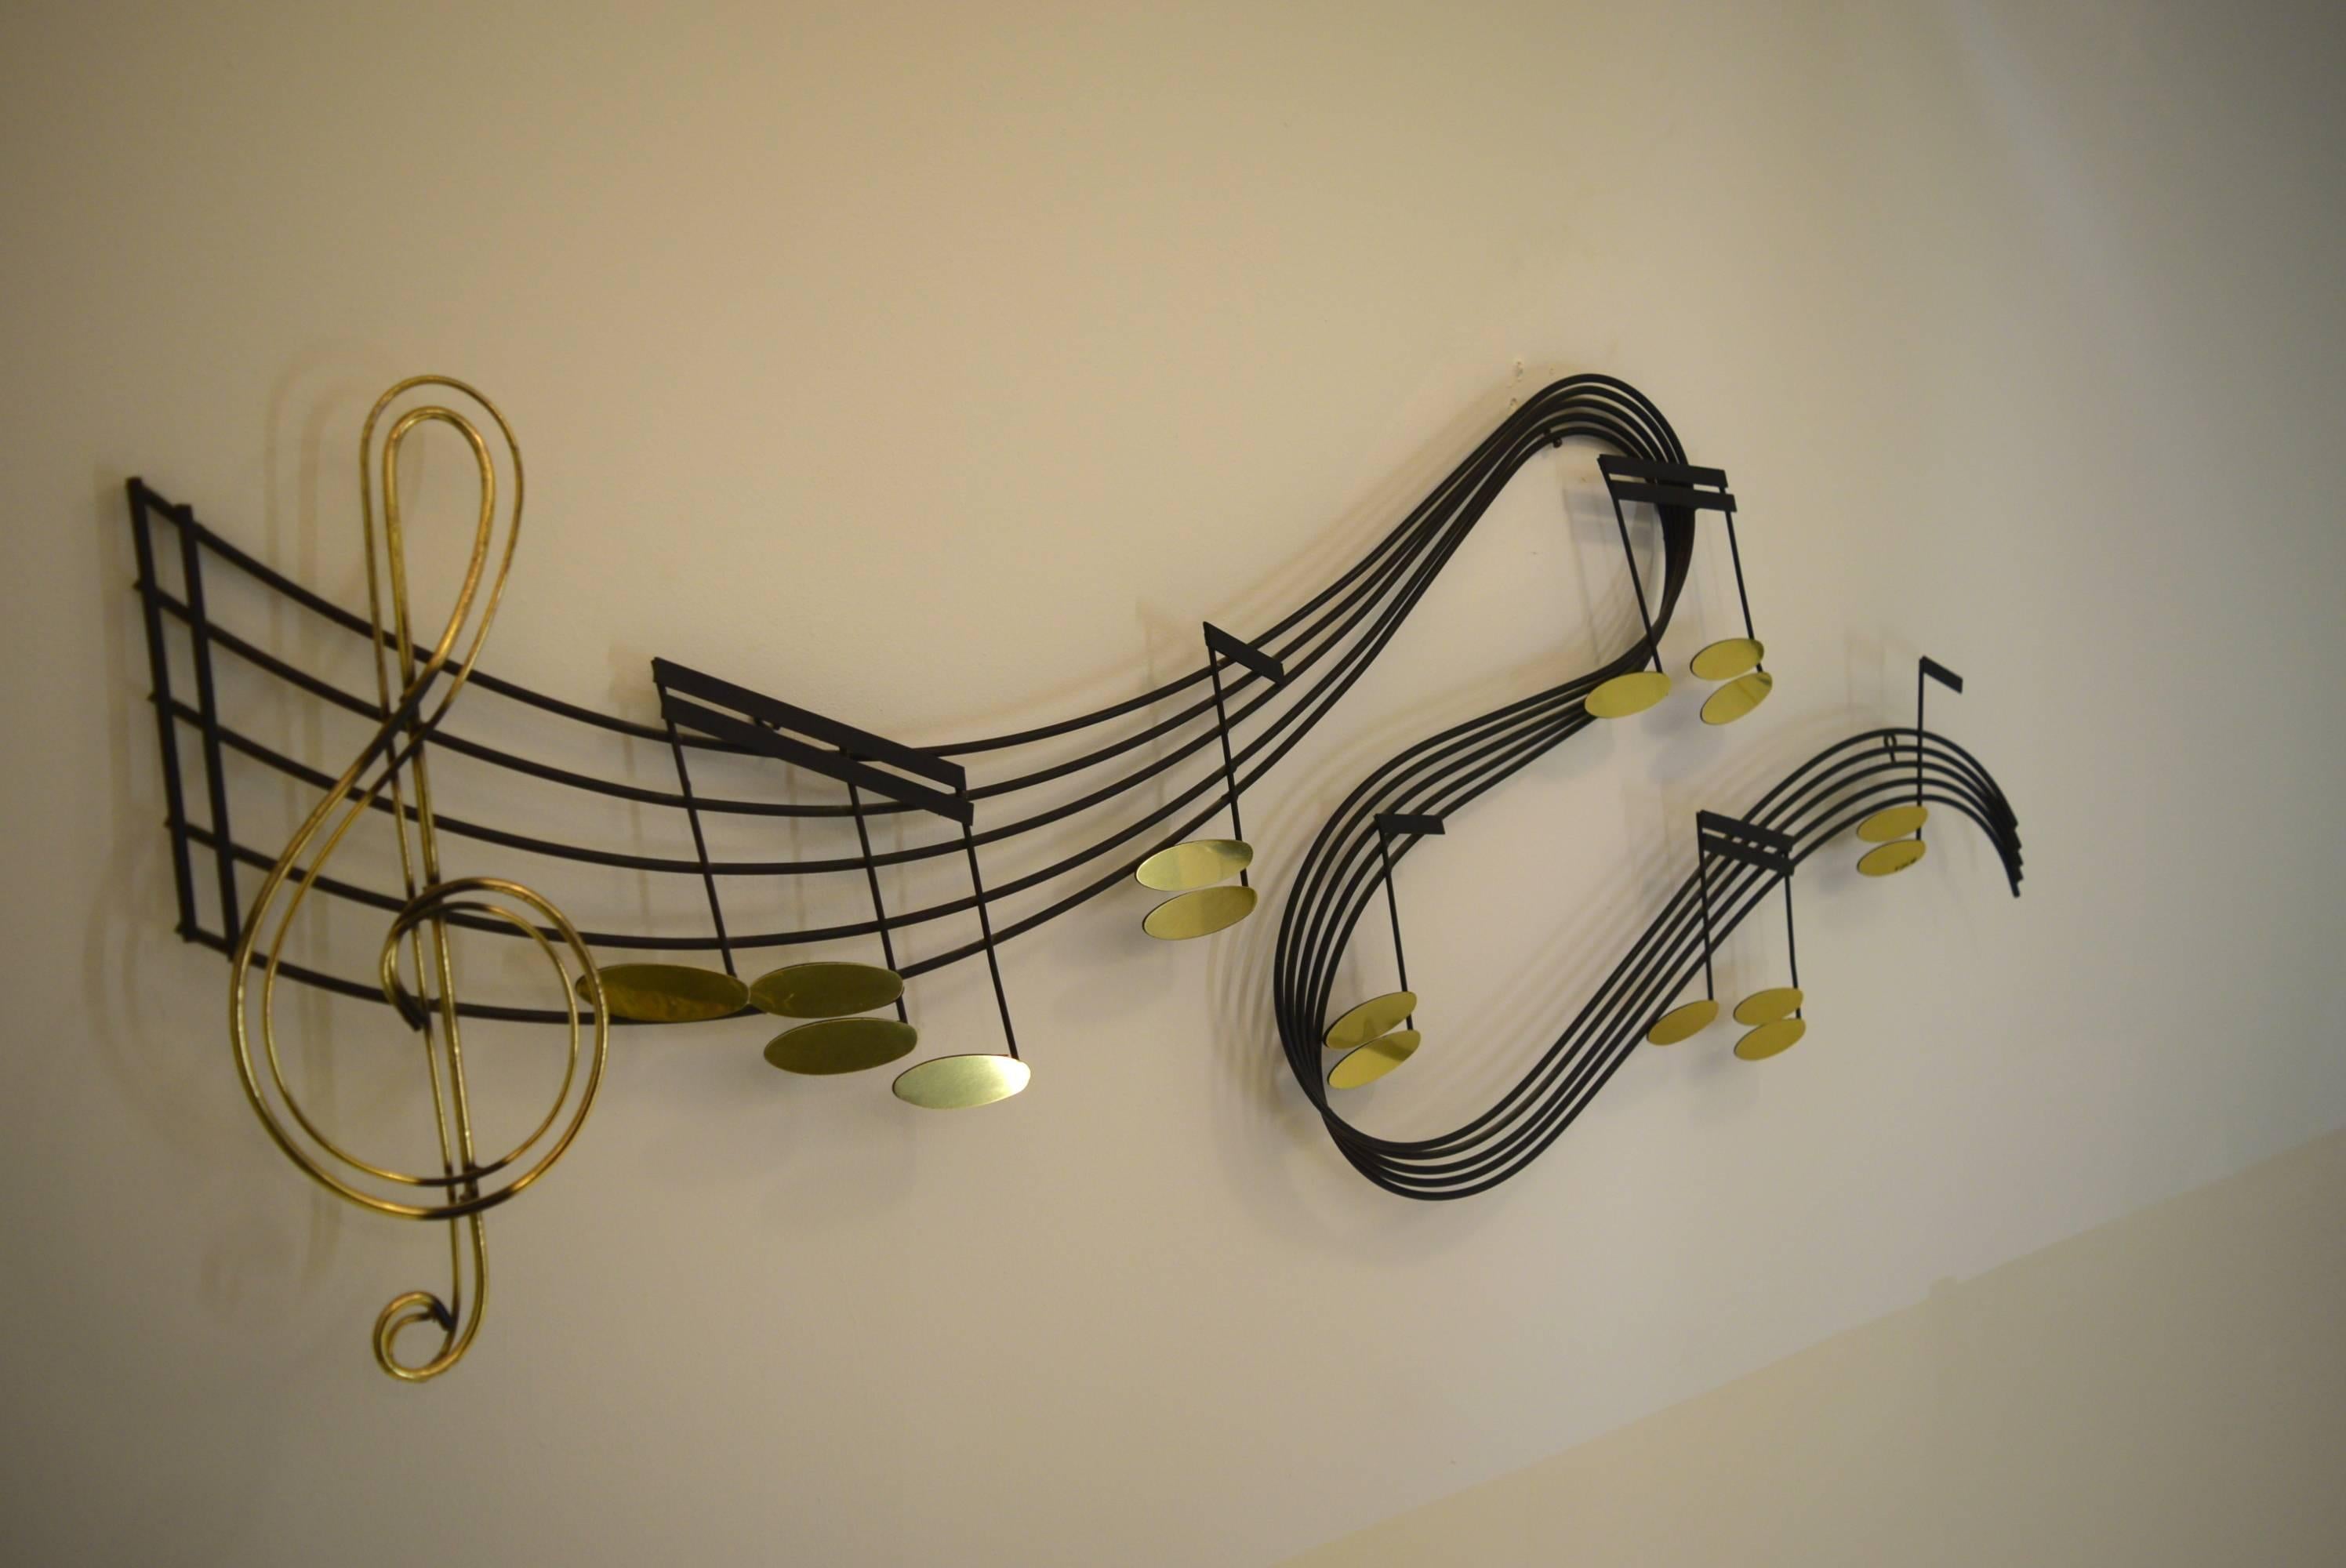 From the artisan studios of Curtis Jere (C. Jere) comes this large wall sculpture featuring a musical sheet note interpretation. This was produced in three sizes, this one being the largest they produced. Ideal for musicians.

Measures 61